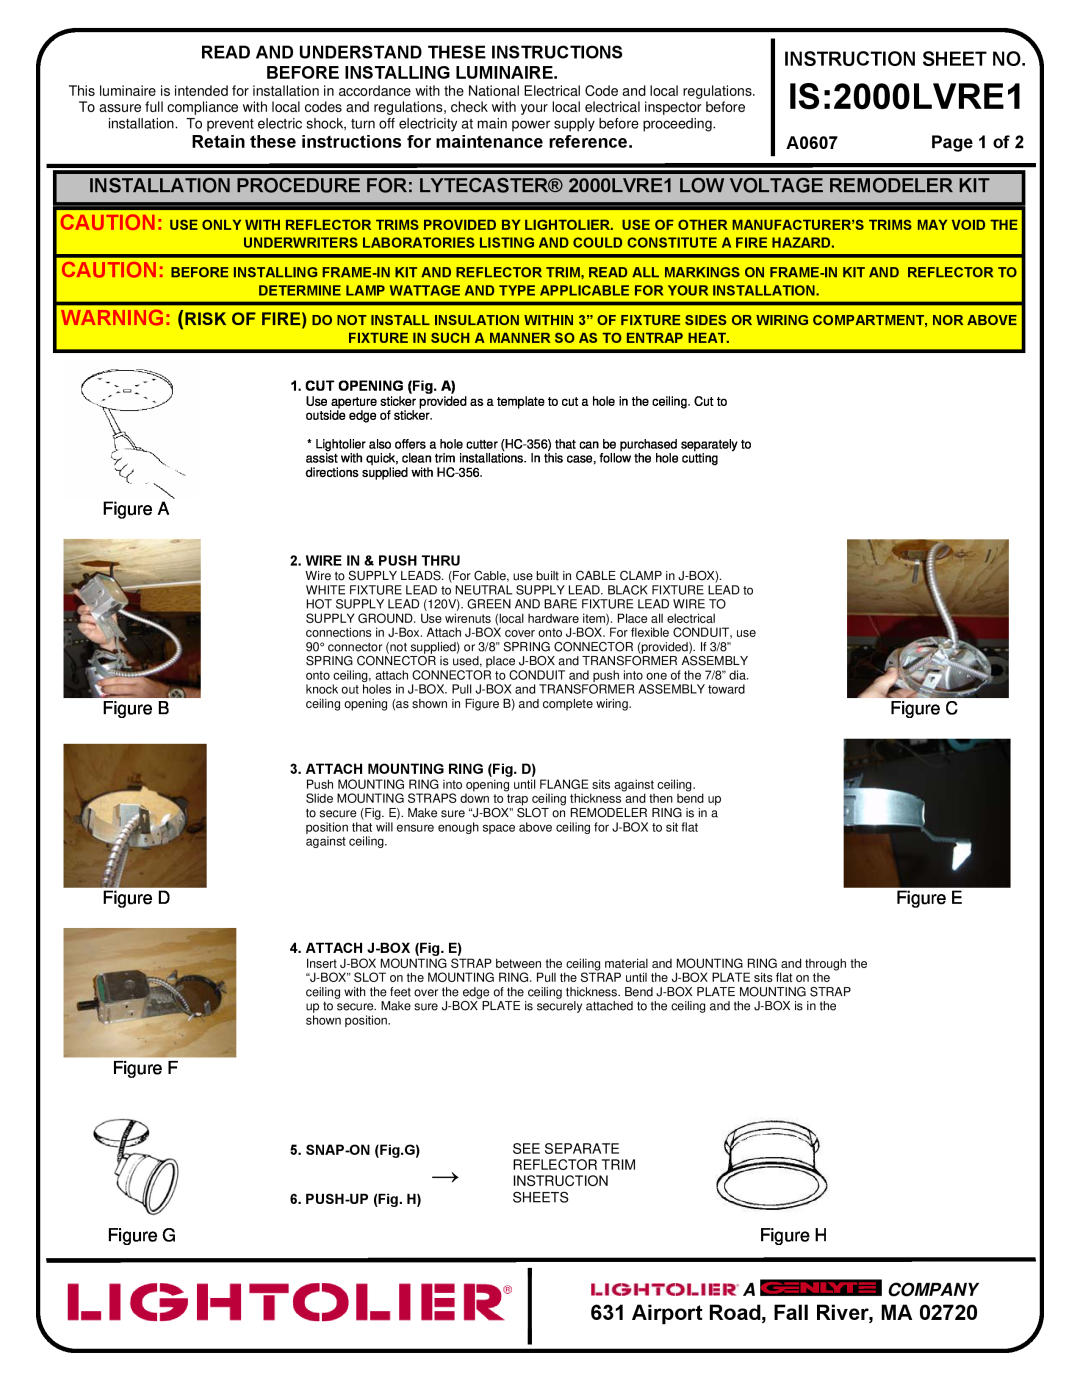 Lightolier IS:2000LVRE1 instruction sheet Airport Road, Fall River, MA, Read And Understand These Instructions, A0607 